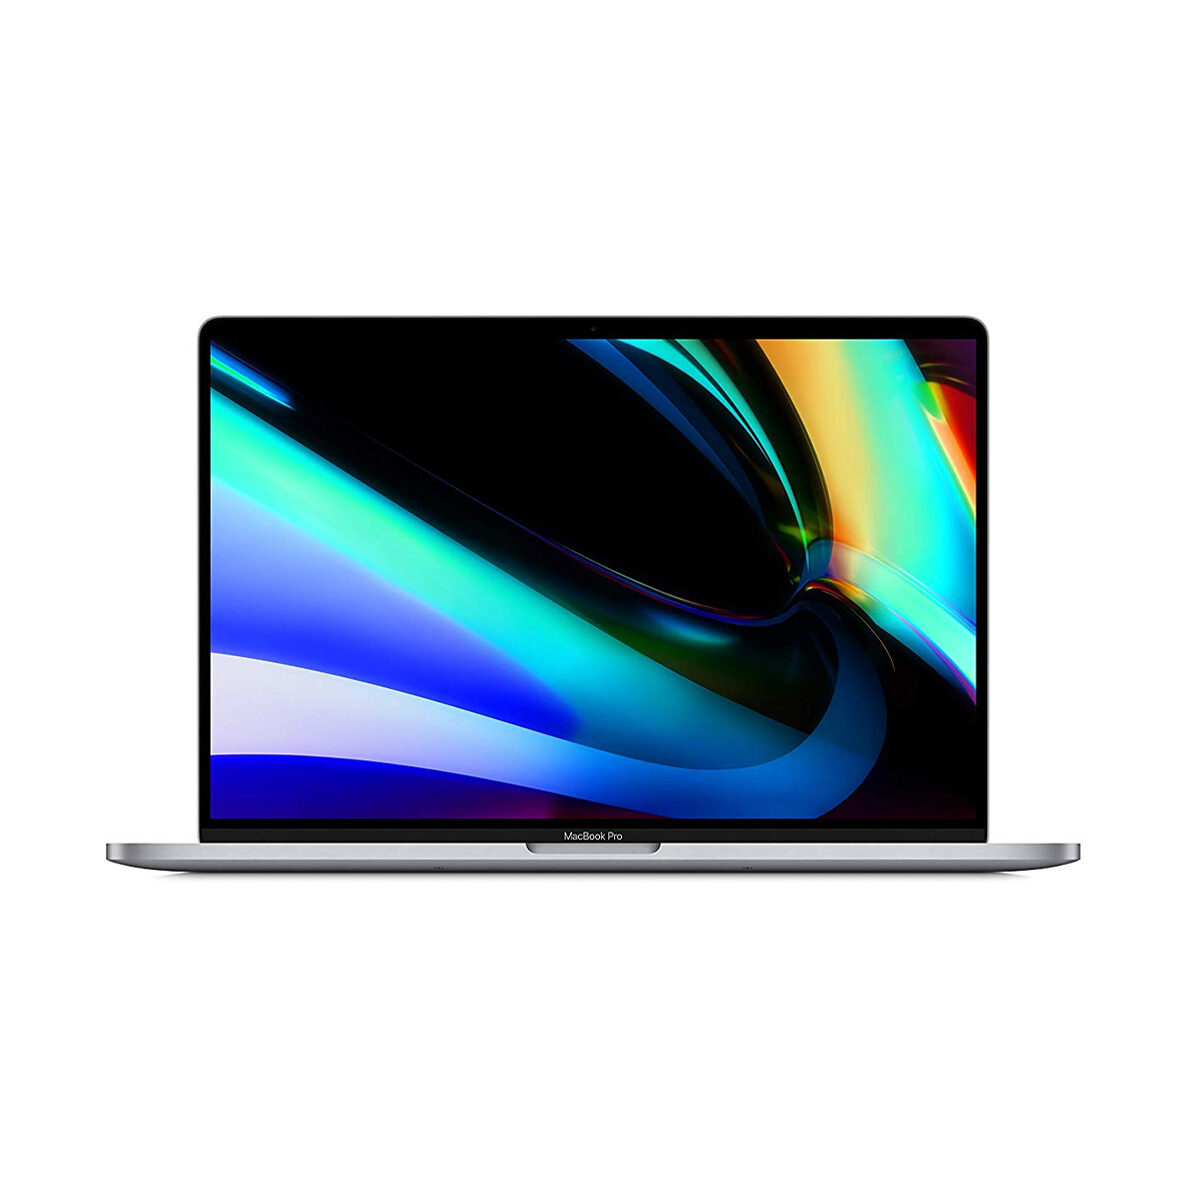 Apple 13-inch MacBook Pro with Touch Bar: 1.4GHz quad-core Intel Core i5